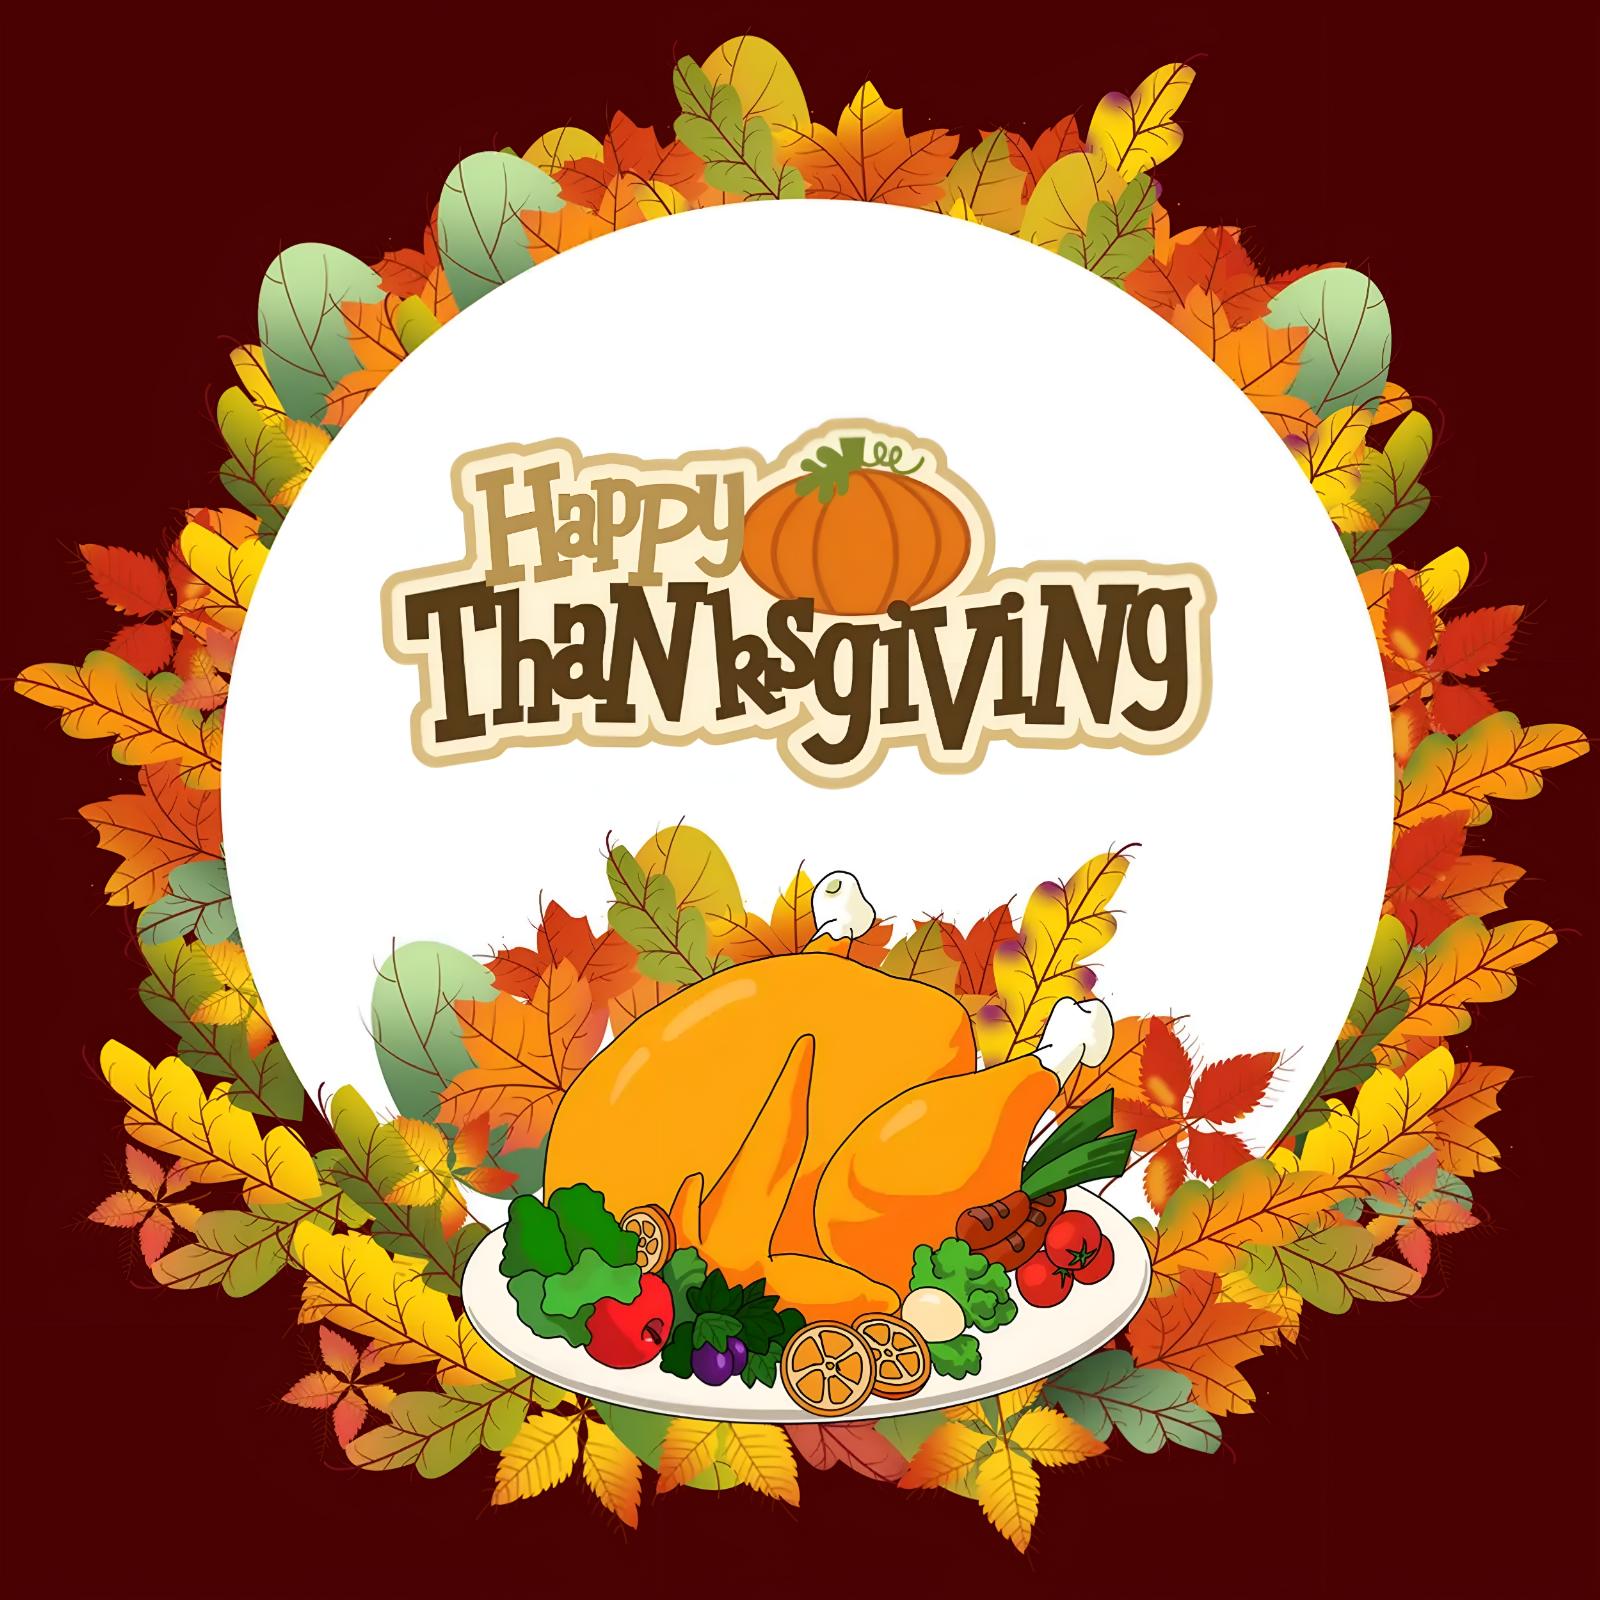 Beautiful Happy Thanksgiving Images